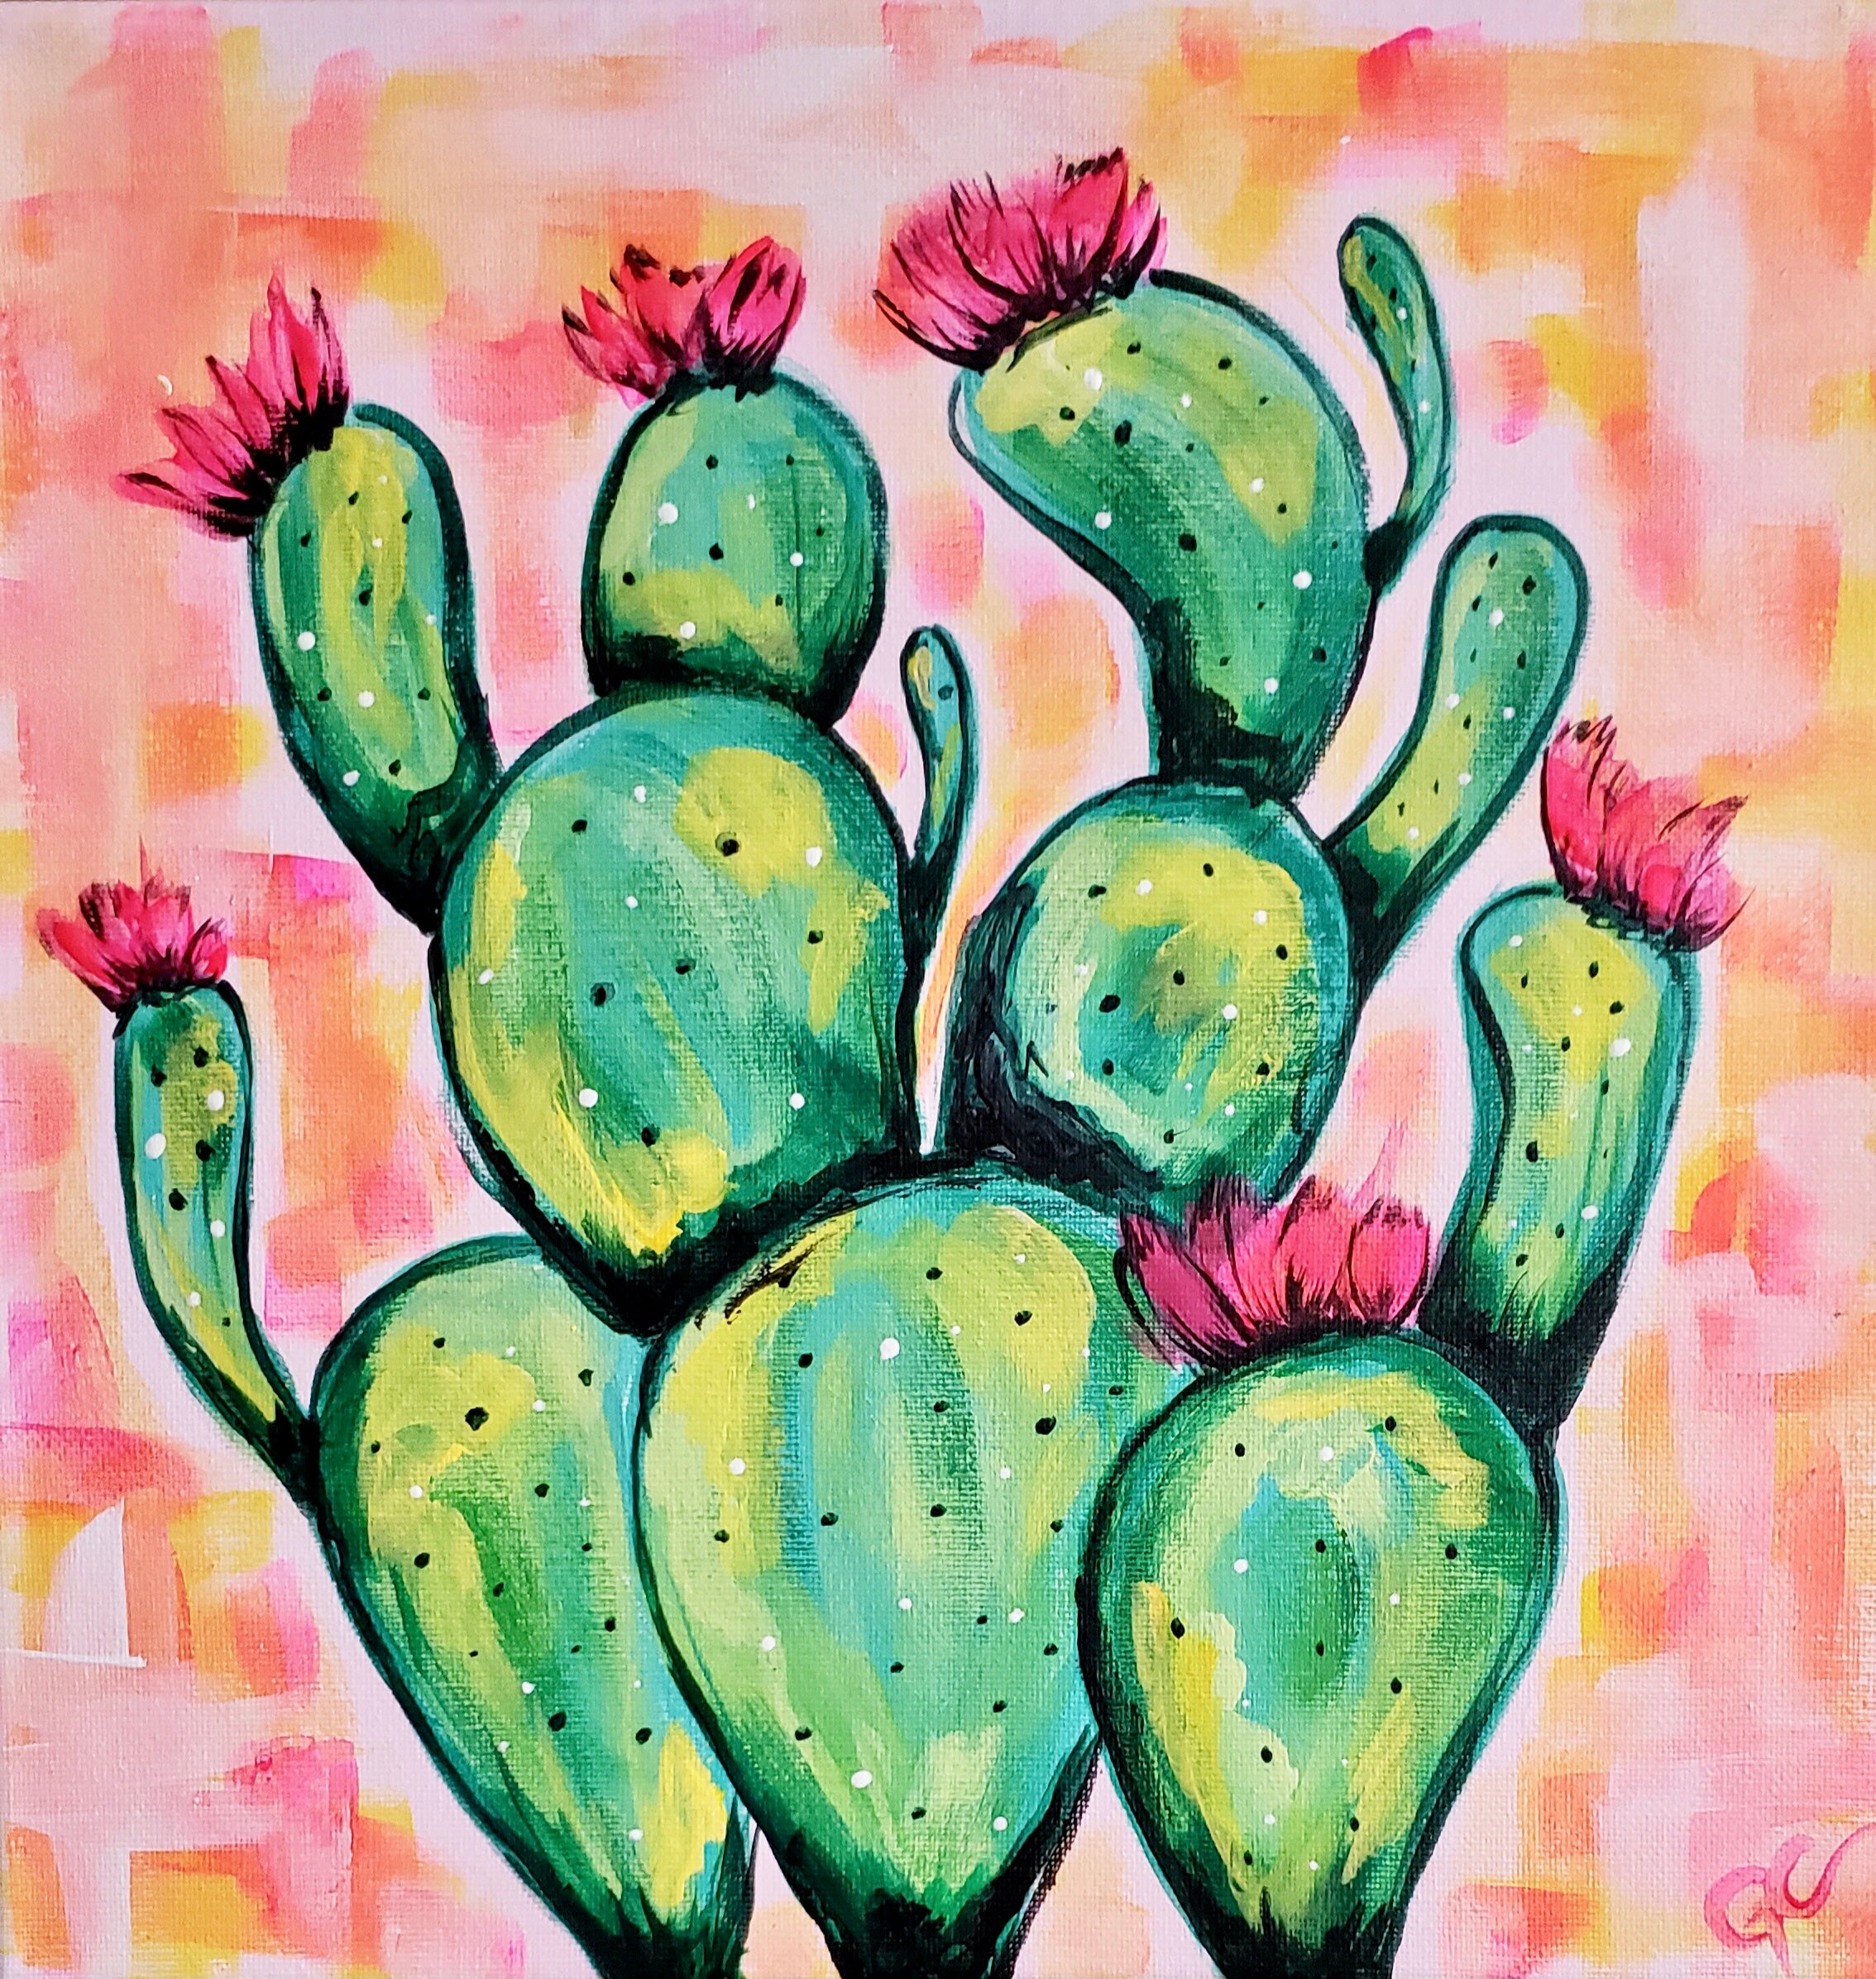 Watercolor Cactus Painting Series - Simple Cactus Landscape With Brusho  Crystals